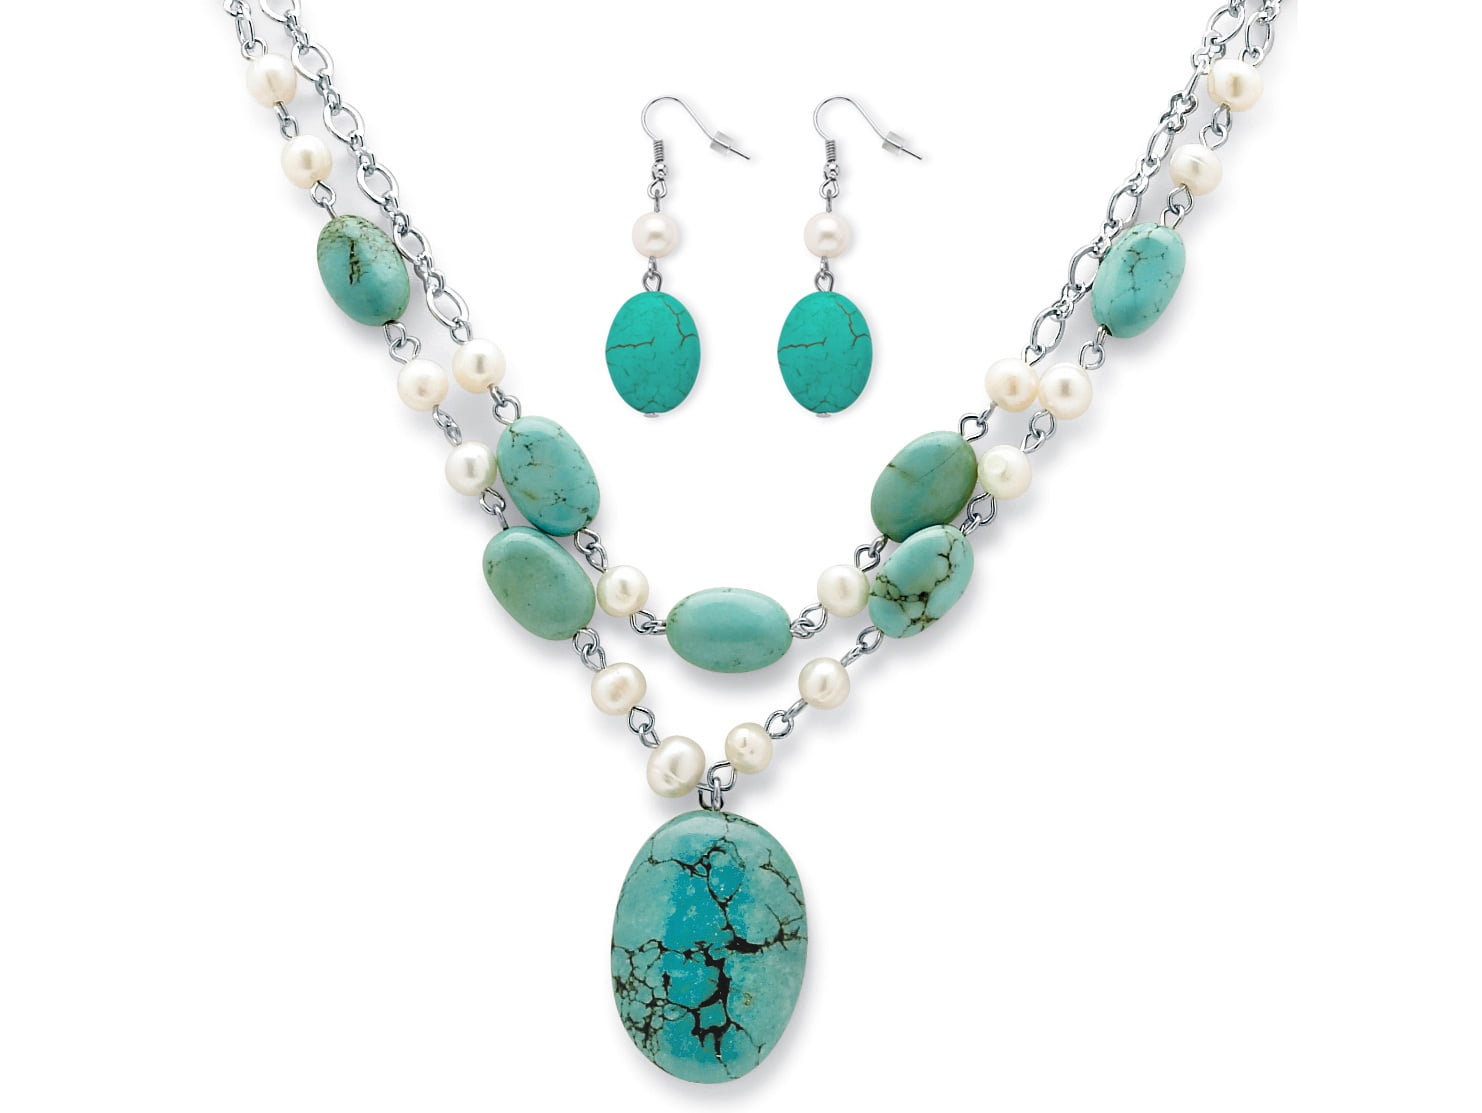 Genuine Turquoise and Cultured Freshwater Pearl Silvertone Necklace and Earrings Set 17"